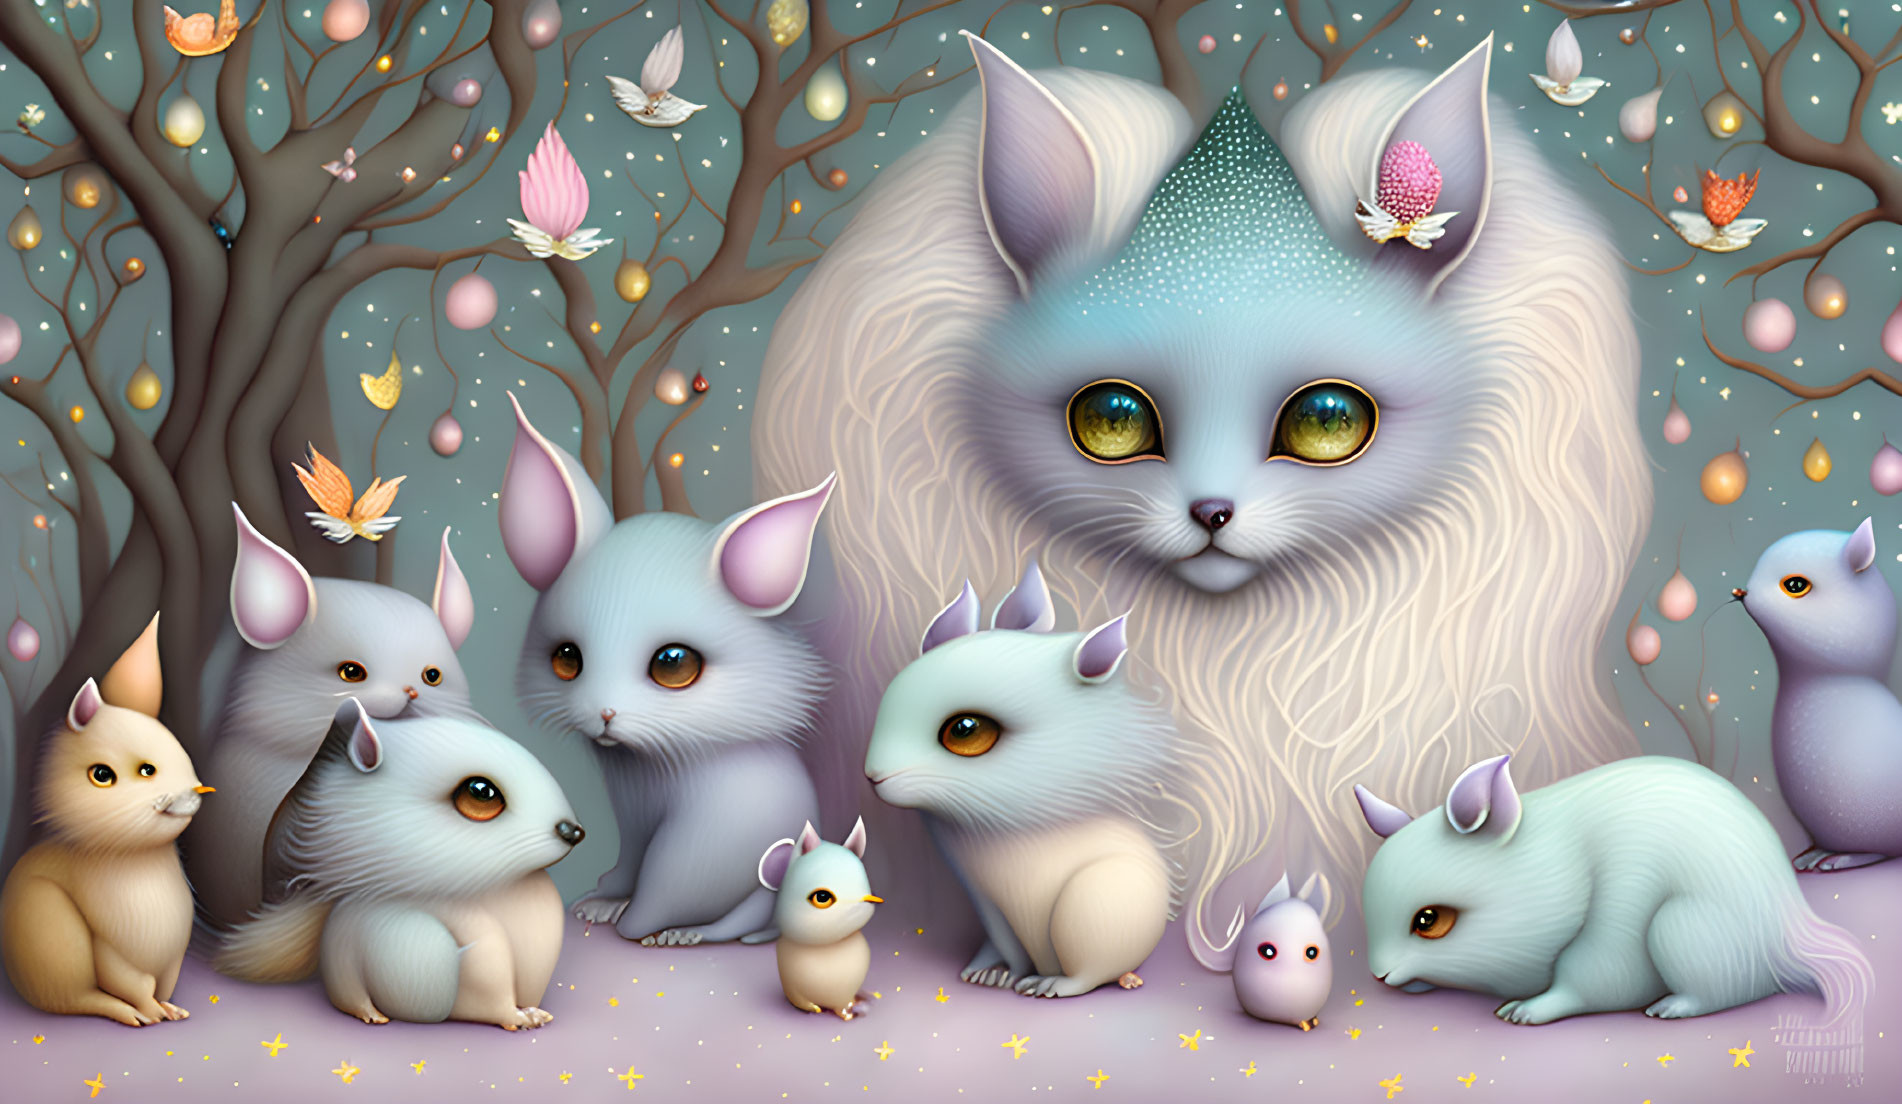 Fluffy cat-like creatures with horns in lilac and cream, amidst butterflies and glowing orbs in enchanted